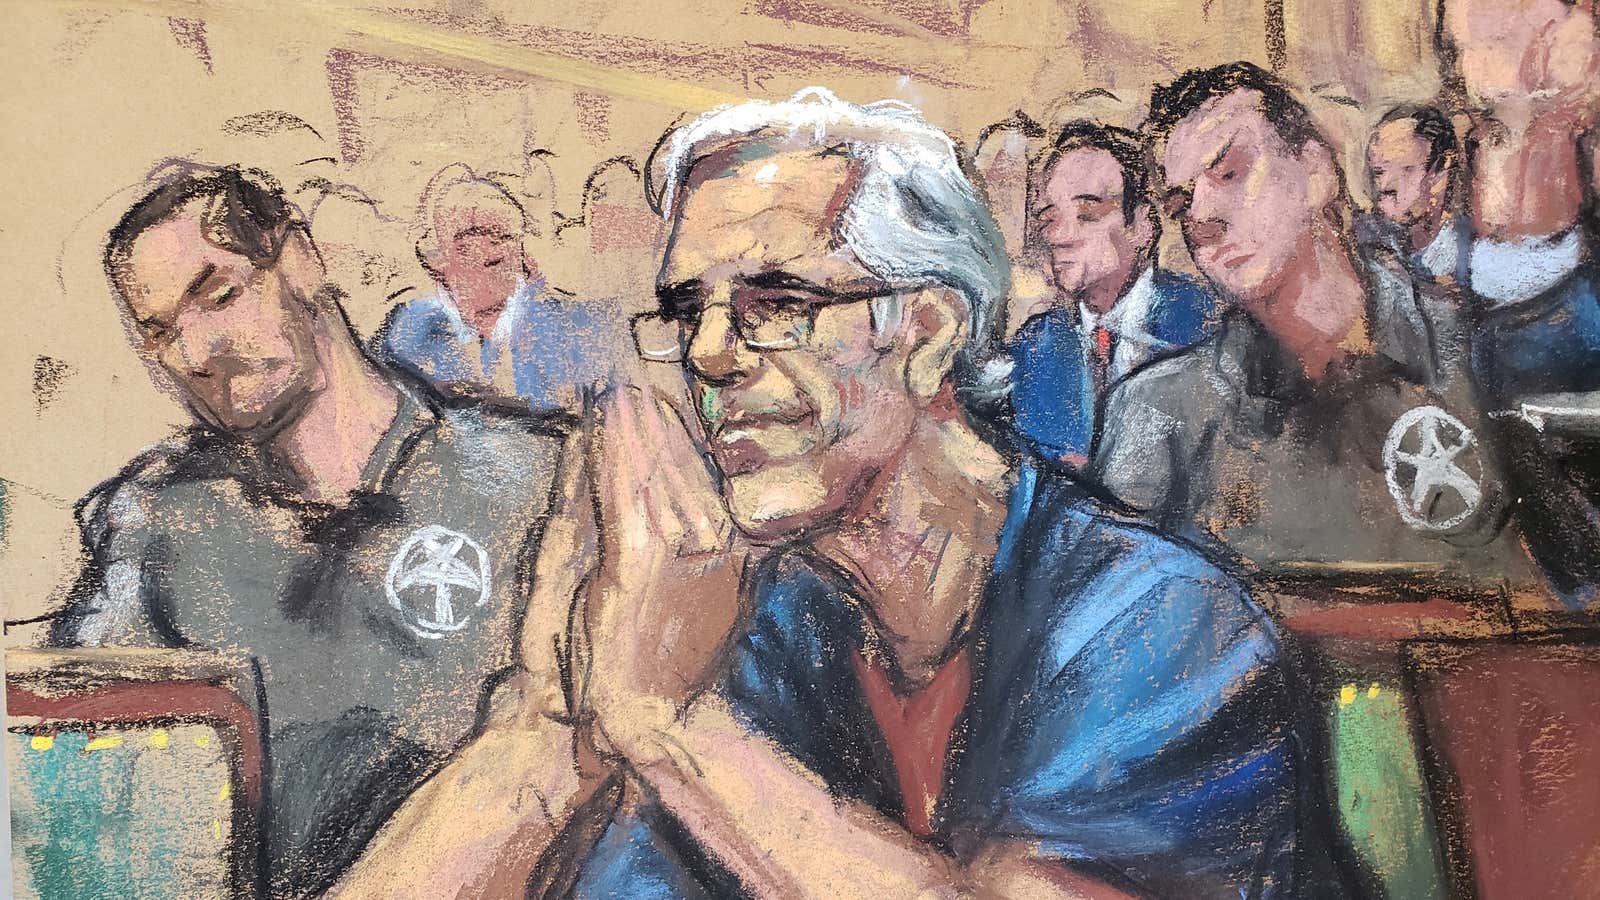 Jeffrey Epstein at a bail hearing for a sex trafficking case.